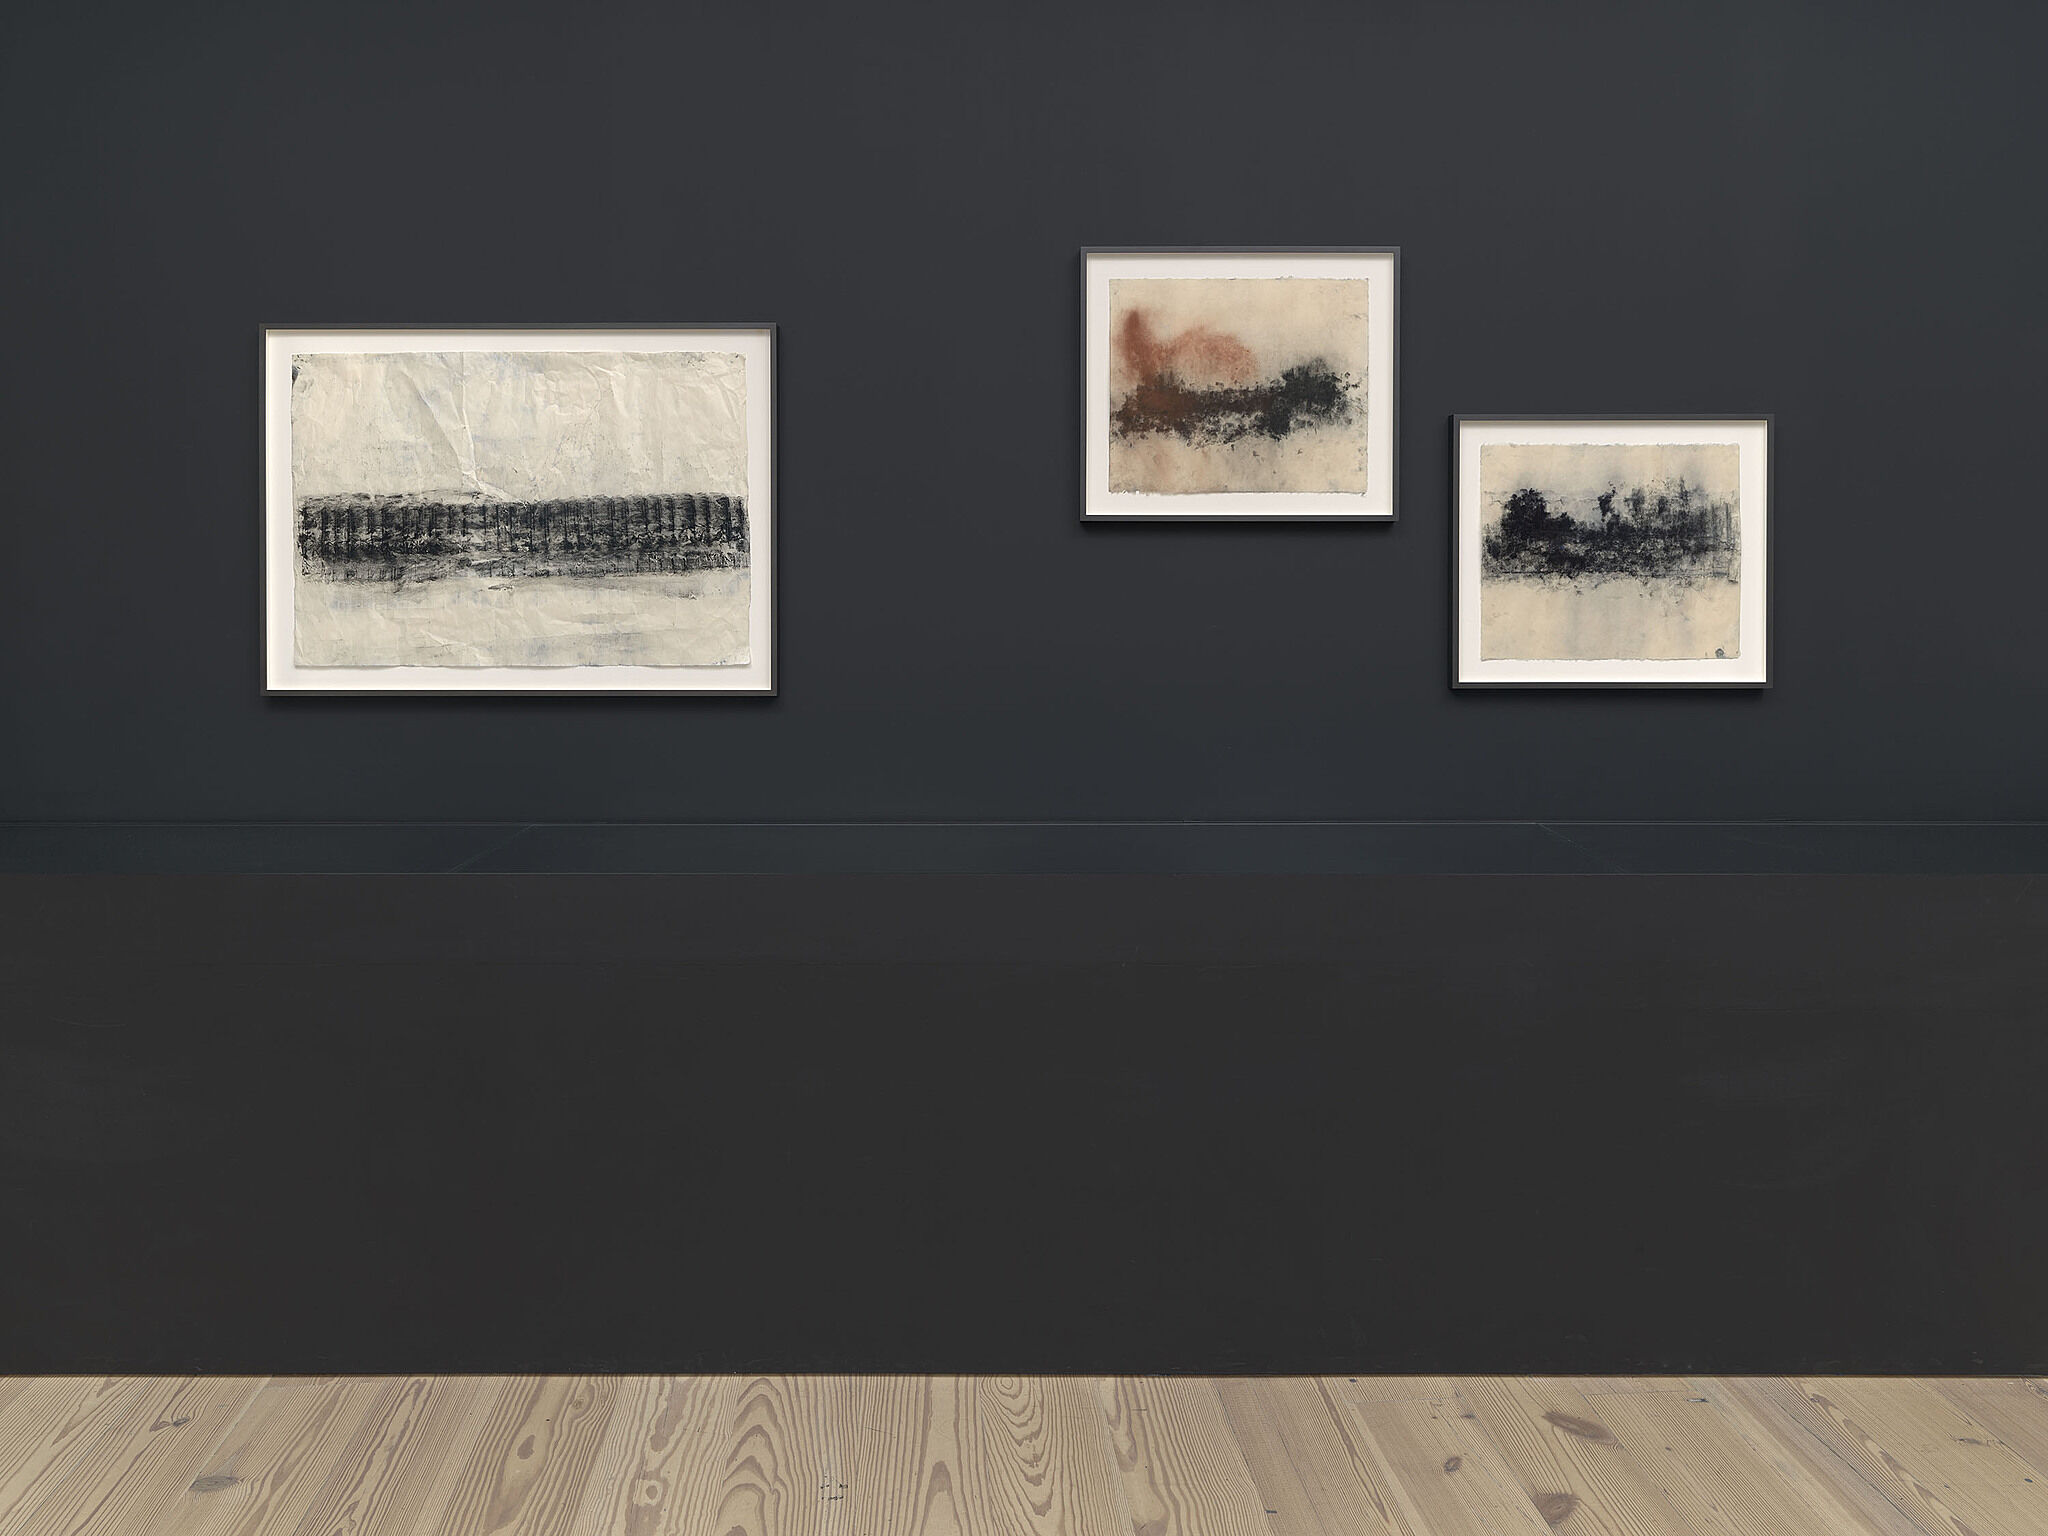 A wall of various charcoal drawings